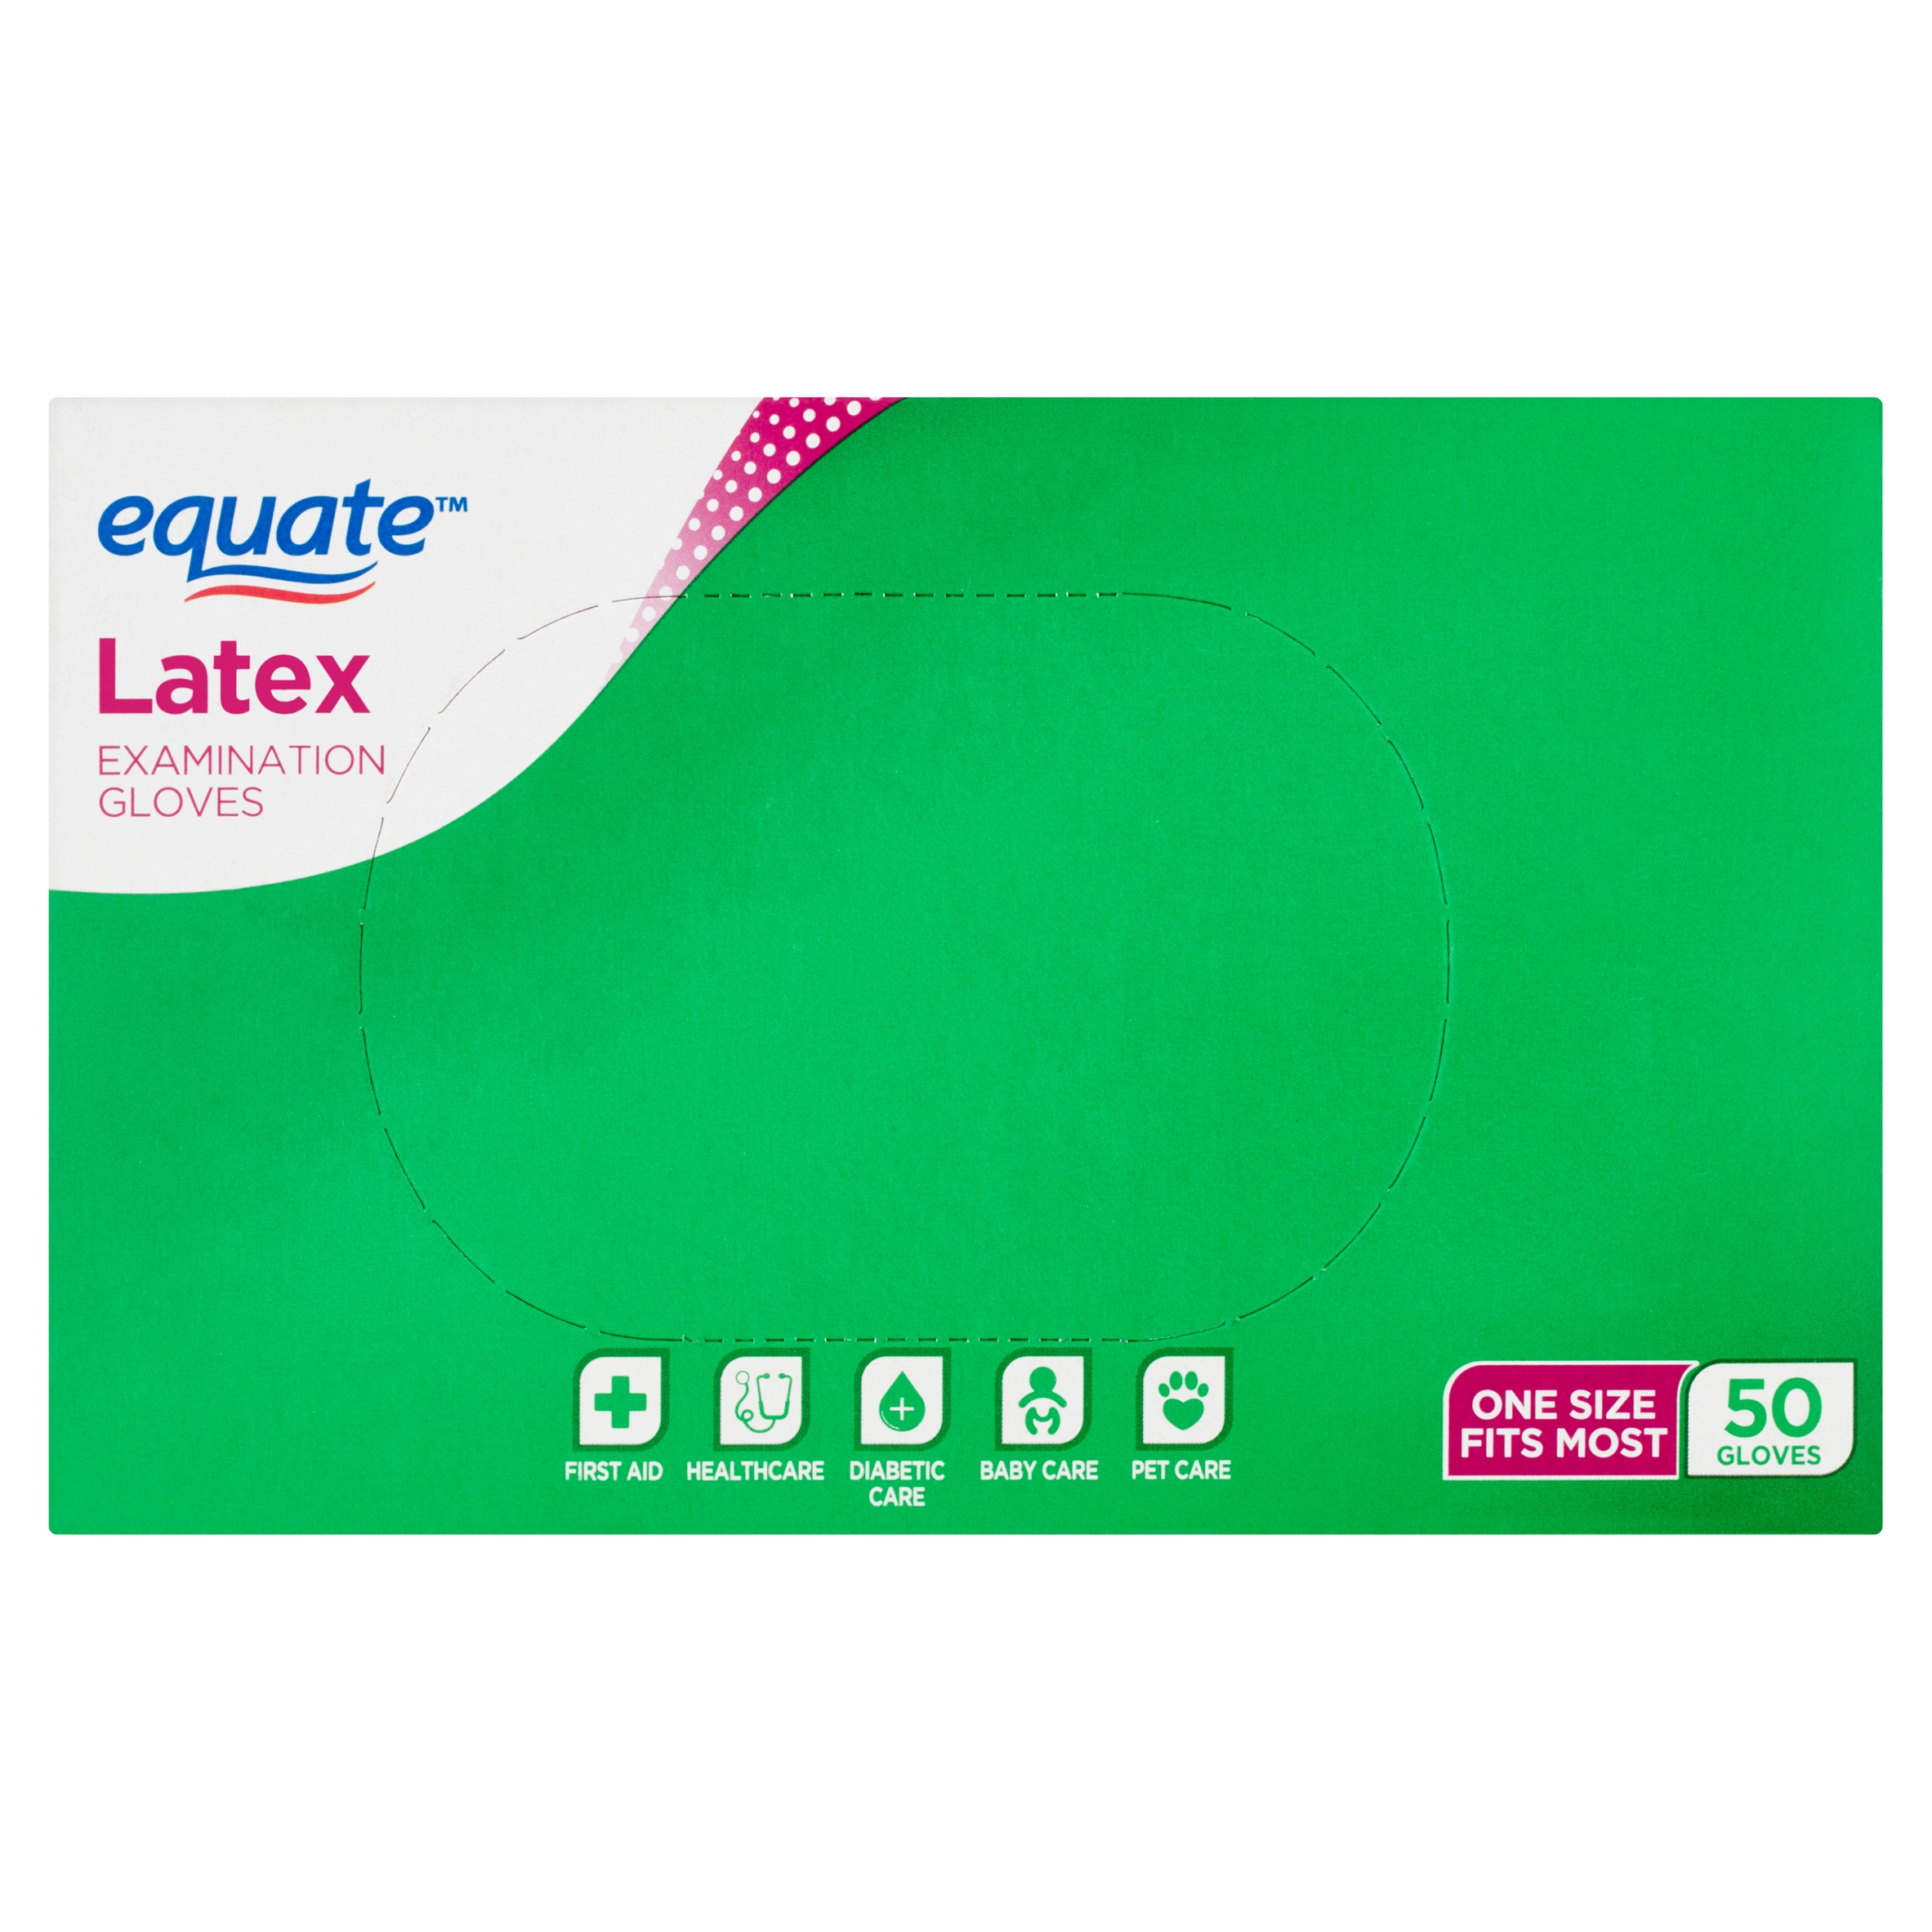 Equate Latex Examination Gloves, 50 Count - image 8 of 10